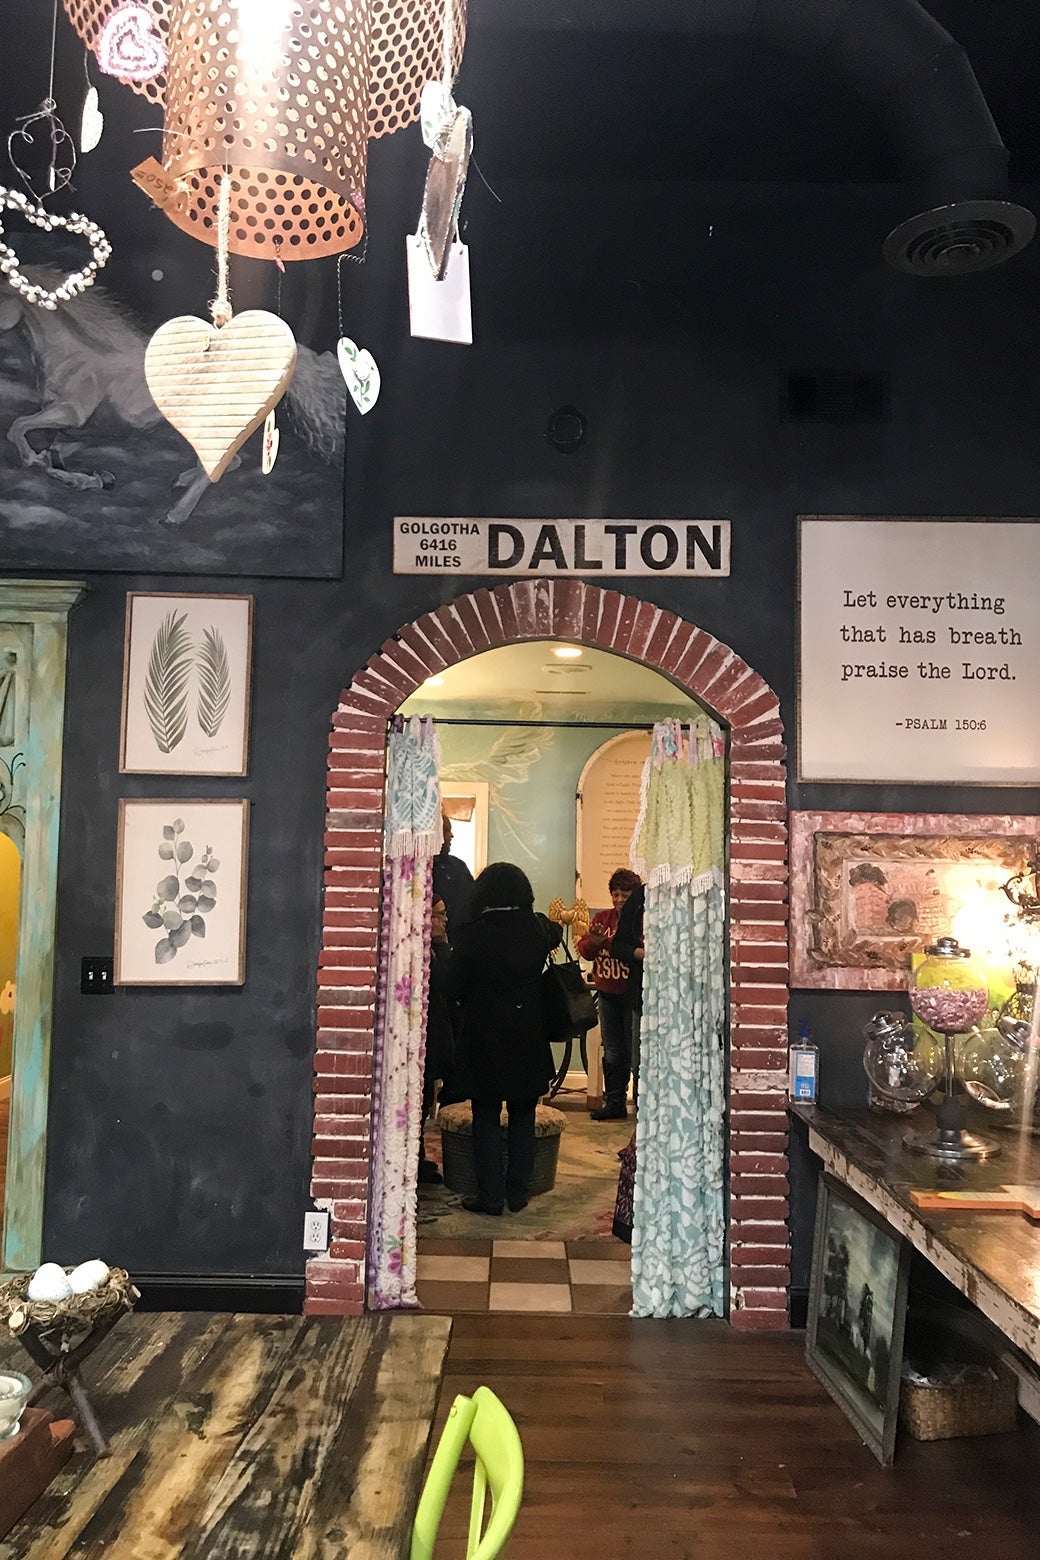 A small brick archway, on top of which is a sign for the city of Dalton. Surrounding the archway are various pictures, tables, a Bible verse, and some lights with hearts.